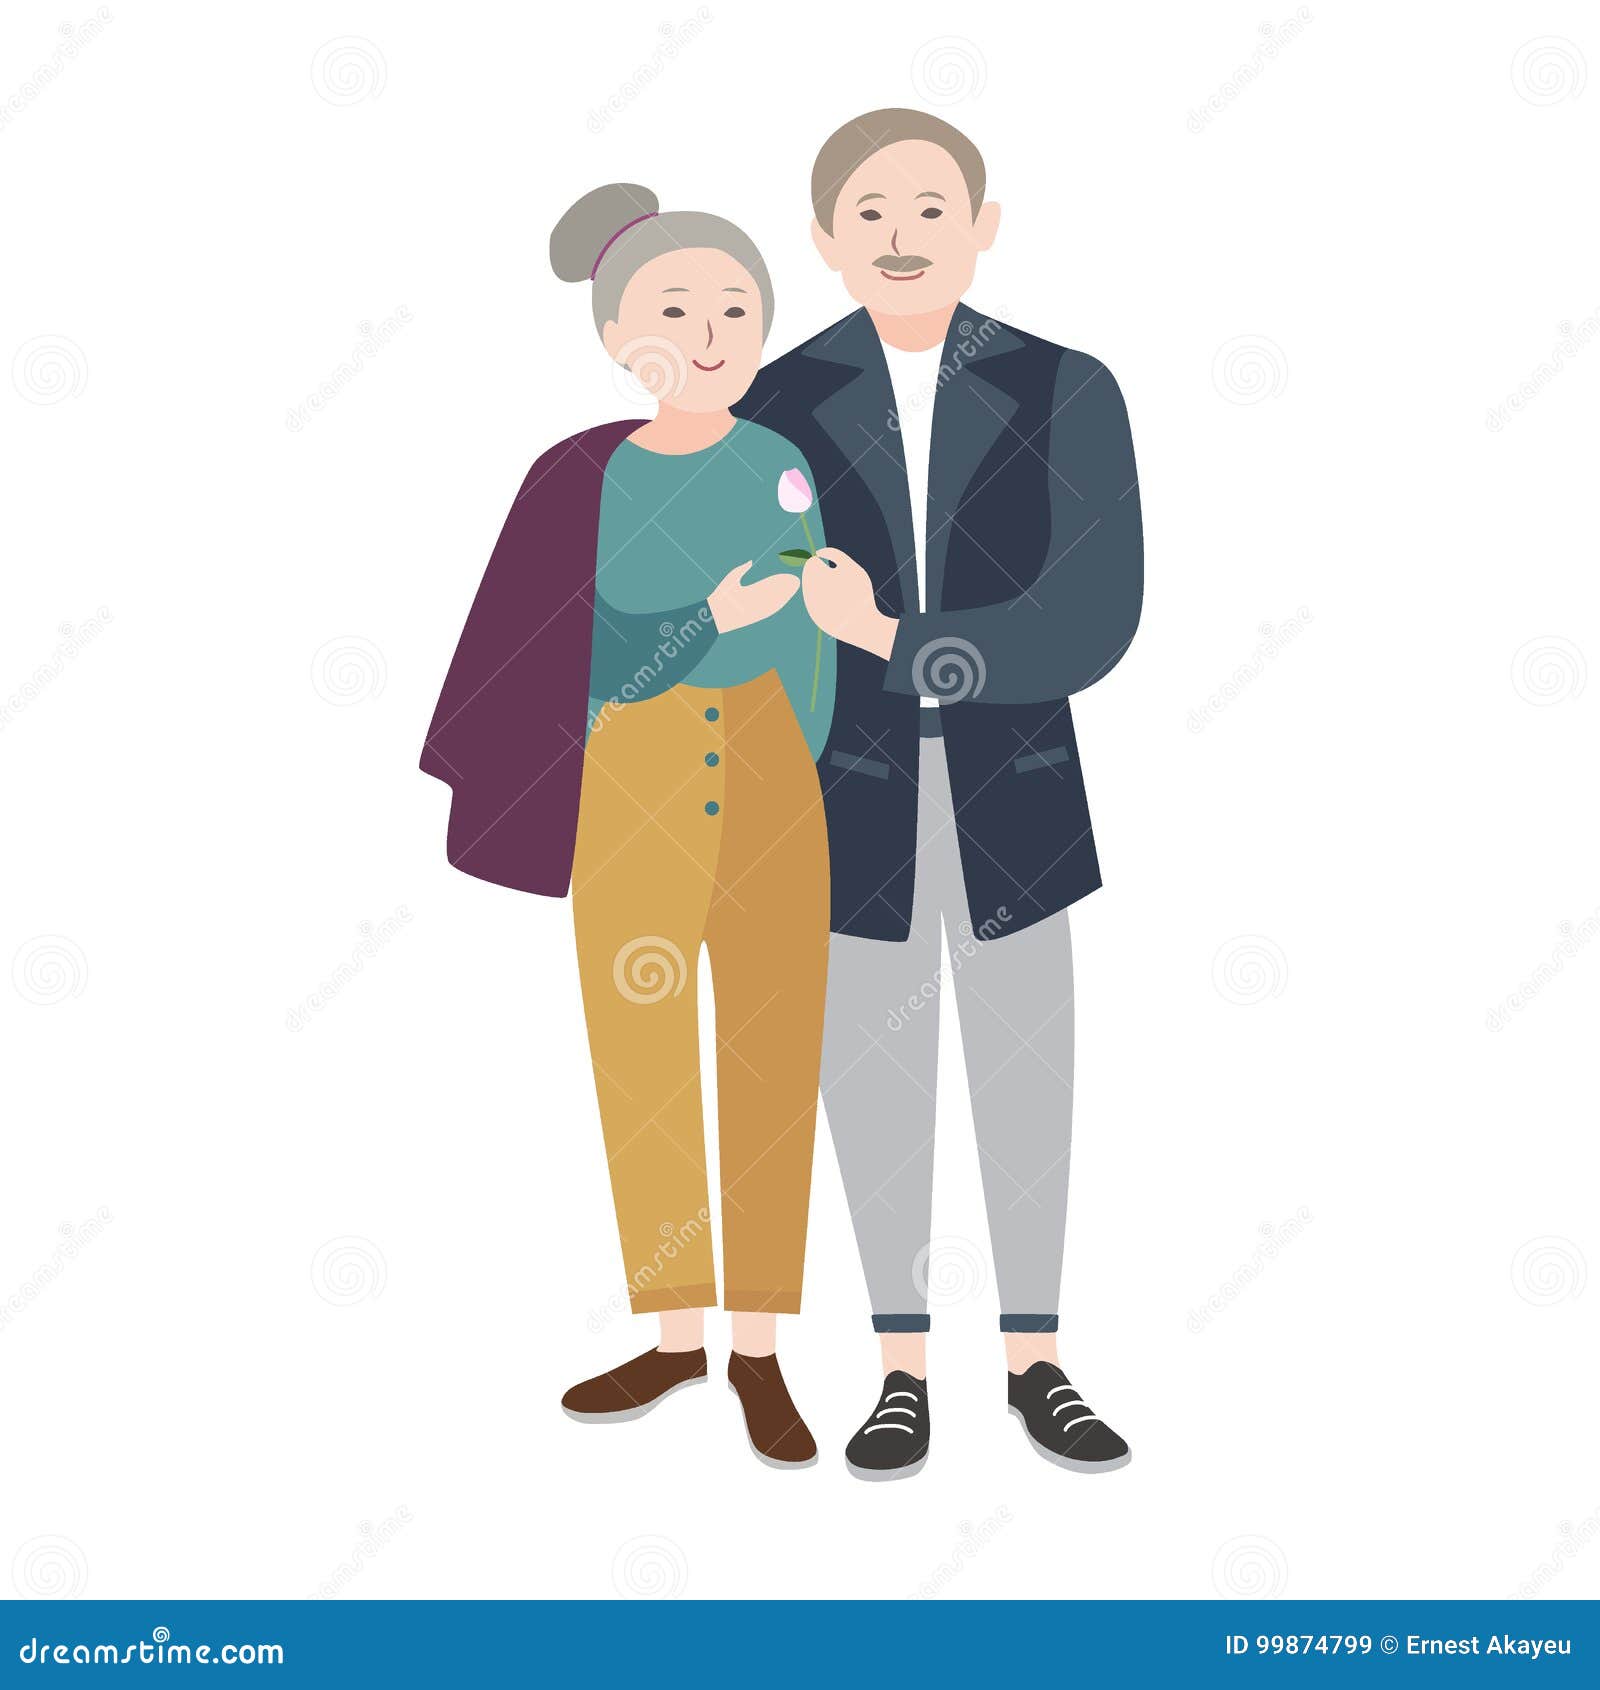 Smiling Old Man Standing beside Elderly Woman, Warmly Embracing Her and ...